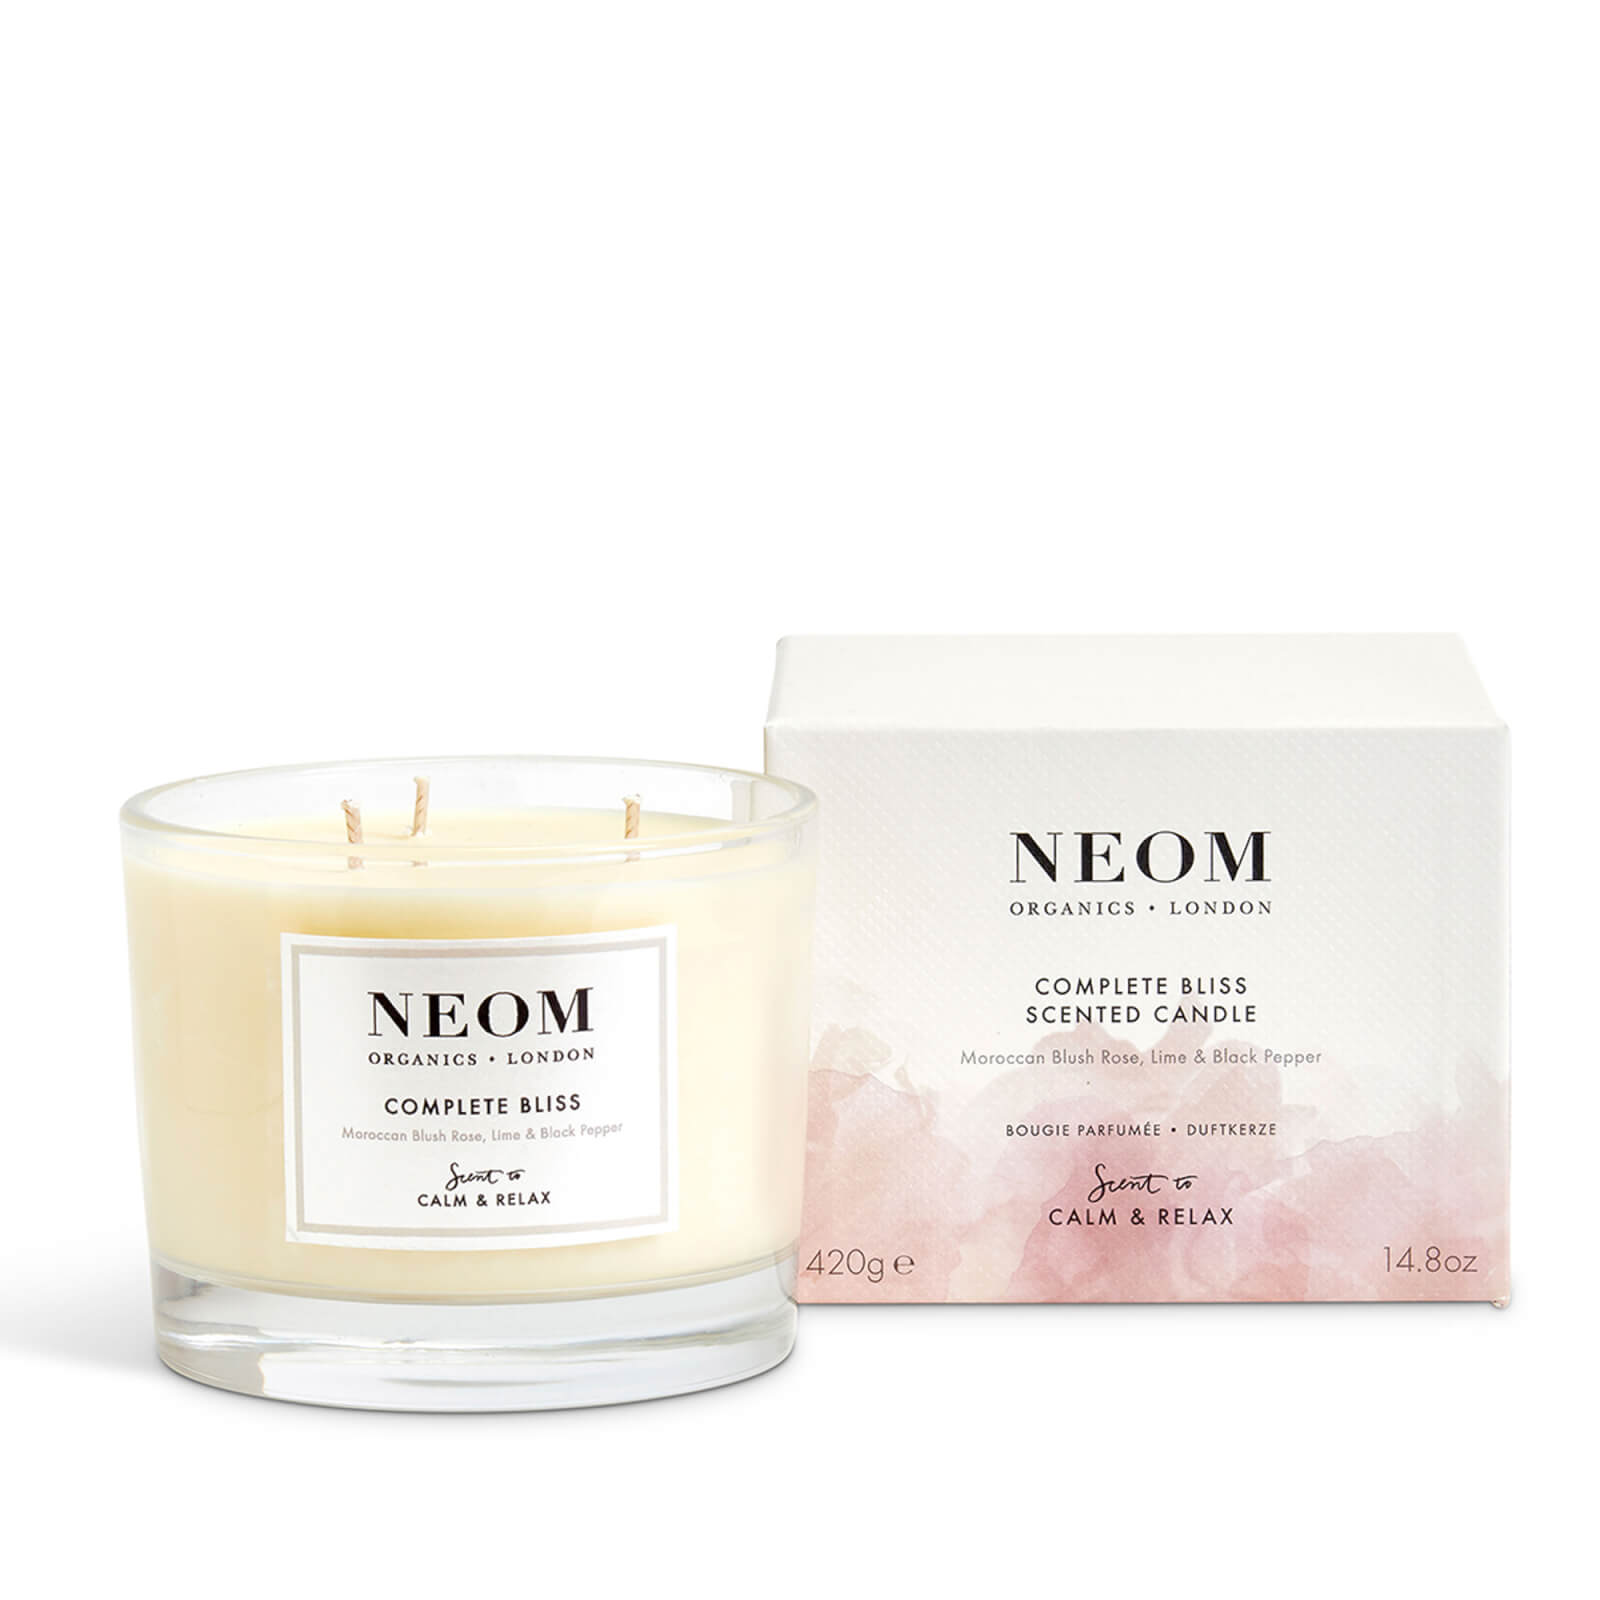 NEOM NEOM ORGANICS COMPLETE BLISS LUXURY SCENTED CANDLE,1101167